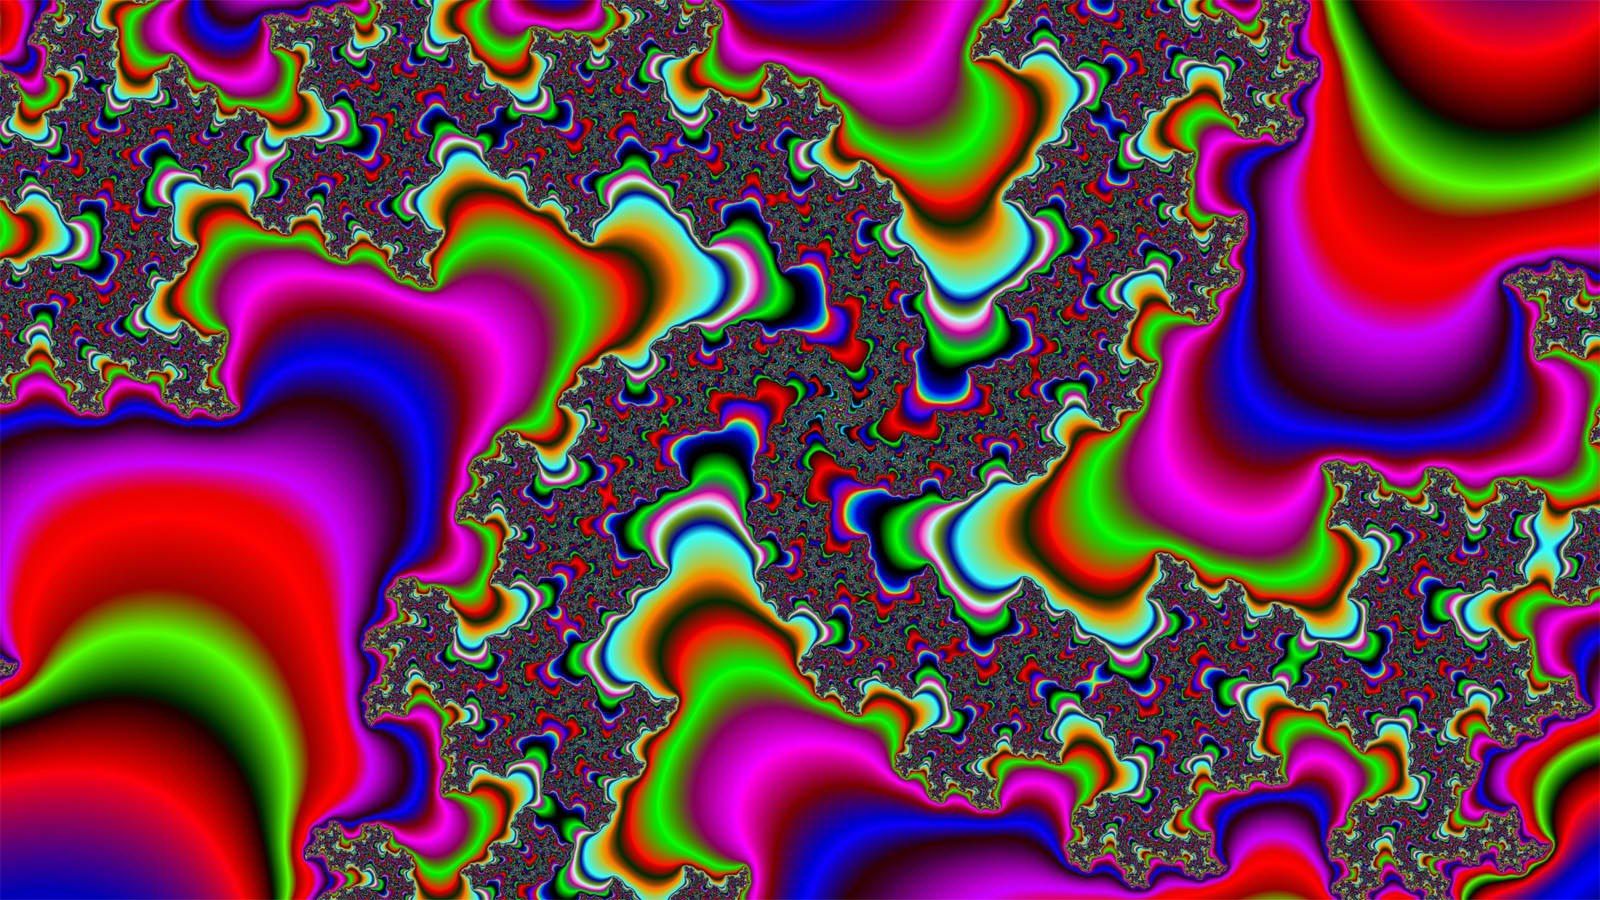 Trippy colorful wallpaper 1600x900 - - High Quality and other